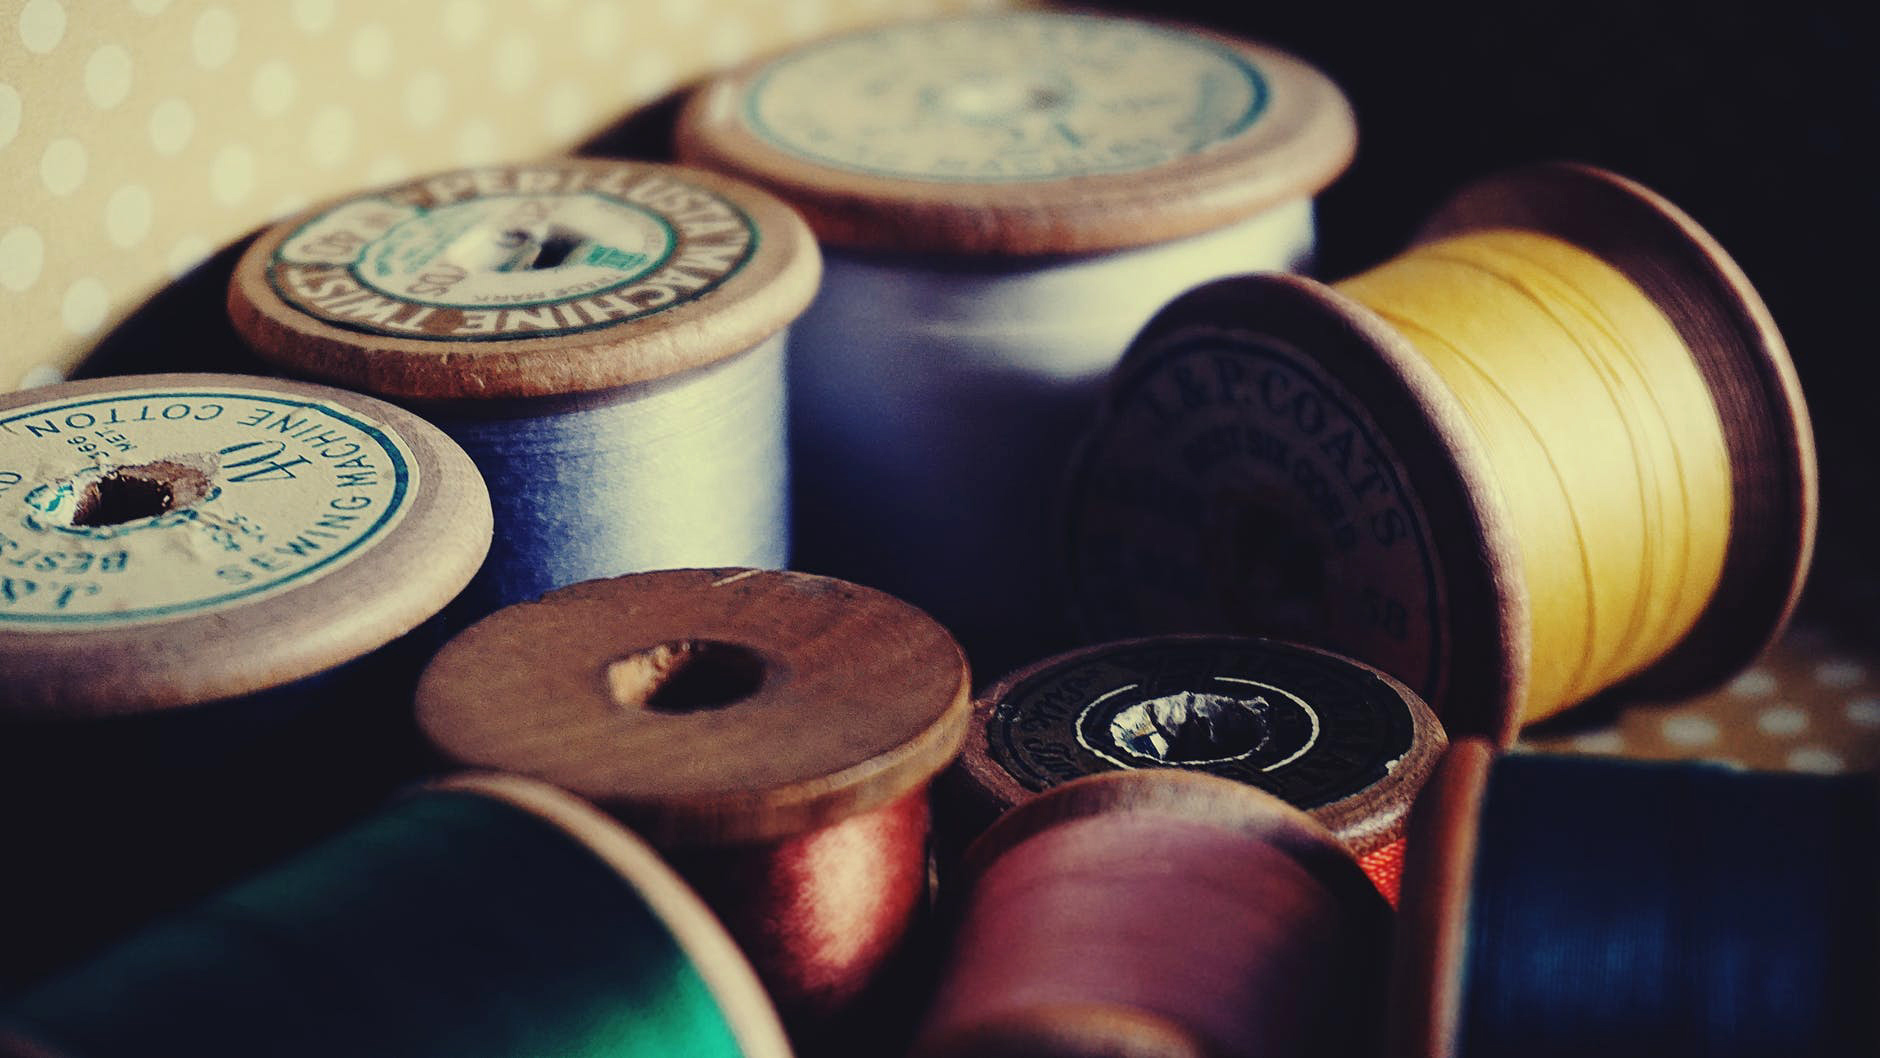 All About Sewing Threads